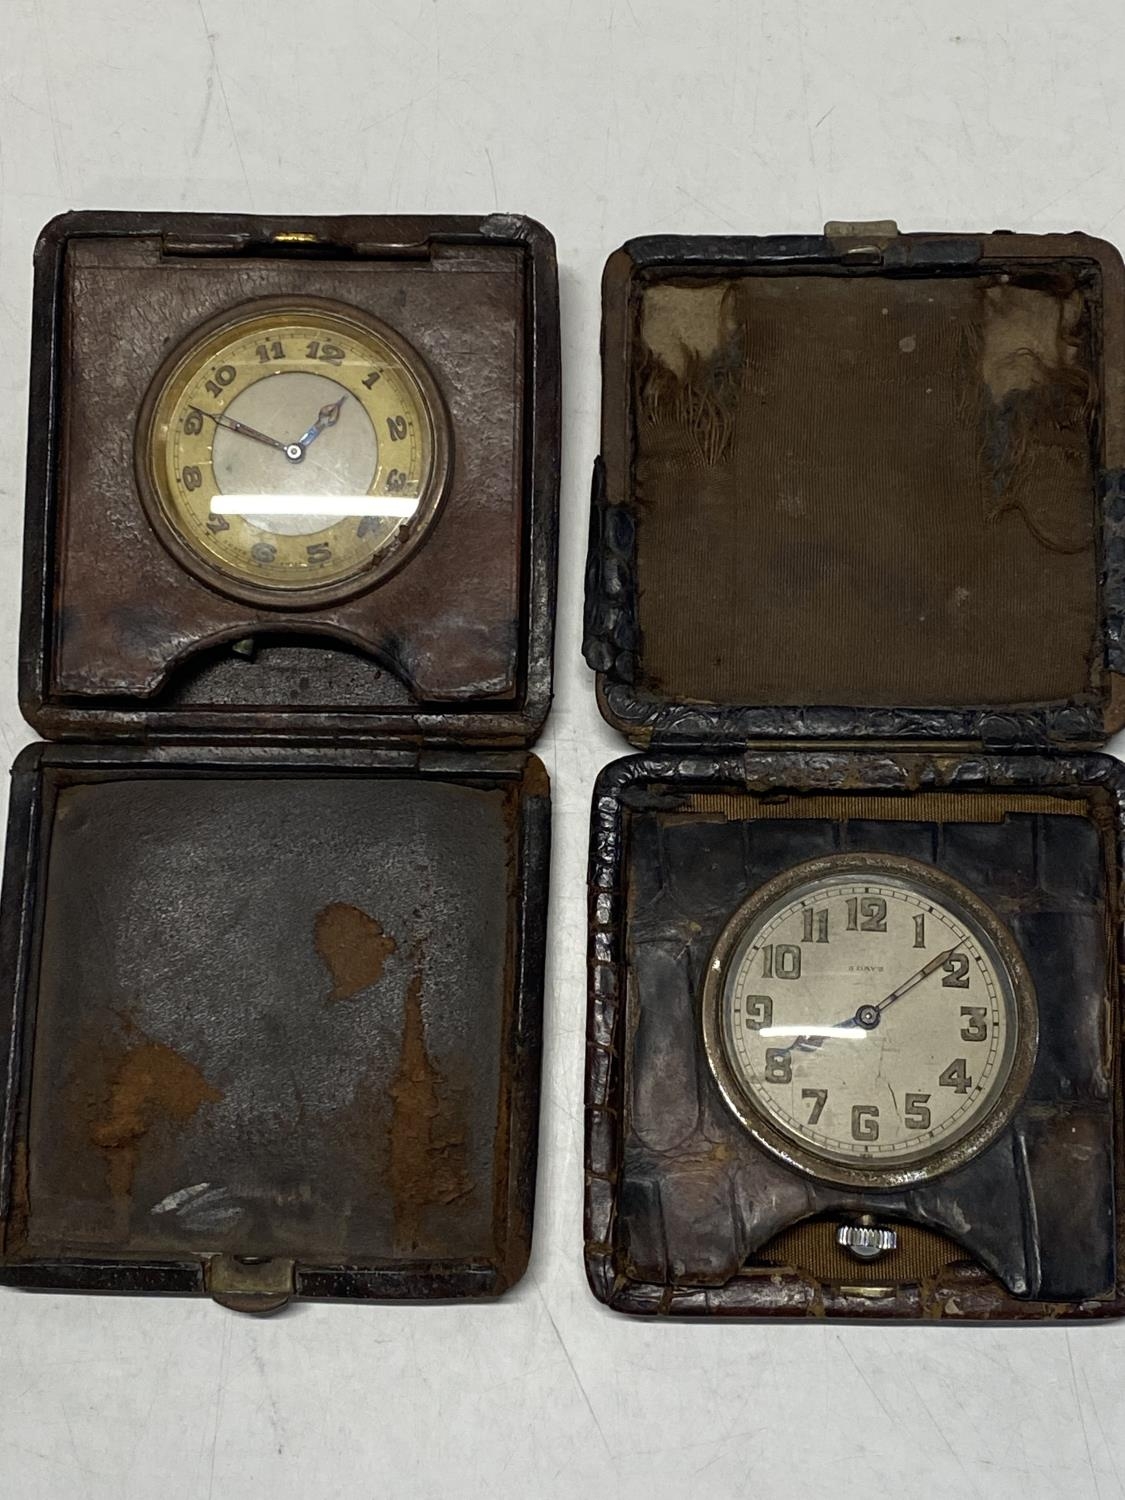 Two vintage stop watches in travel cases a/f